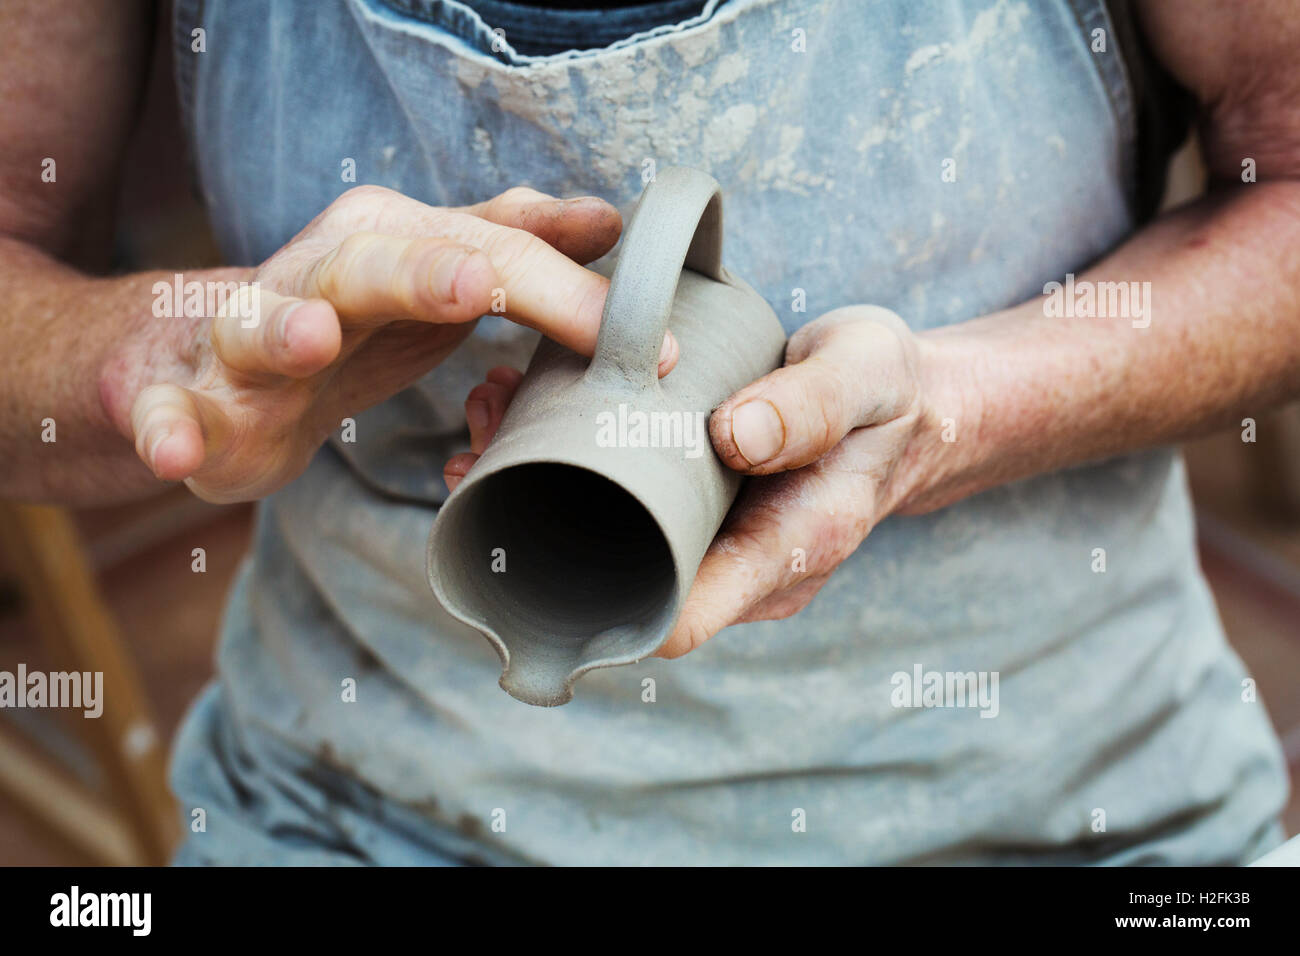 A potter handling a wet clay pot, smoothing the outside and preparing it for kiln firing. Stock Photo